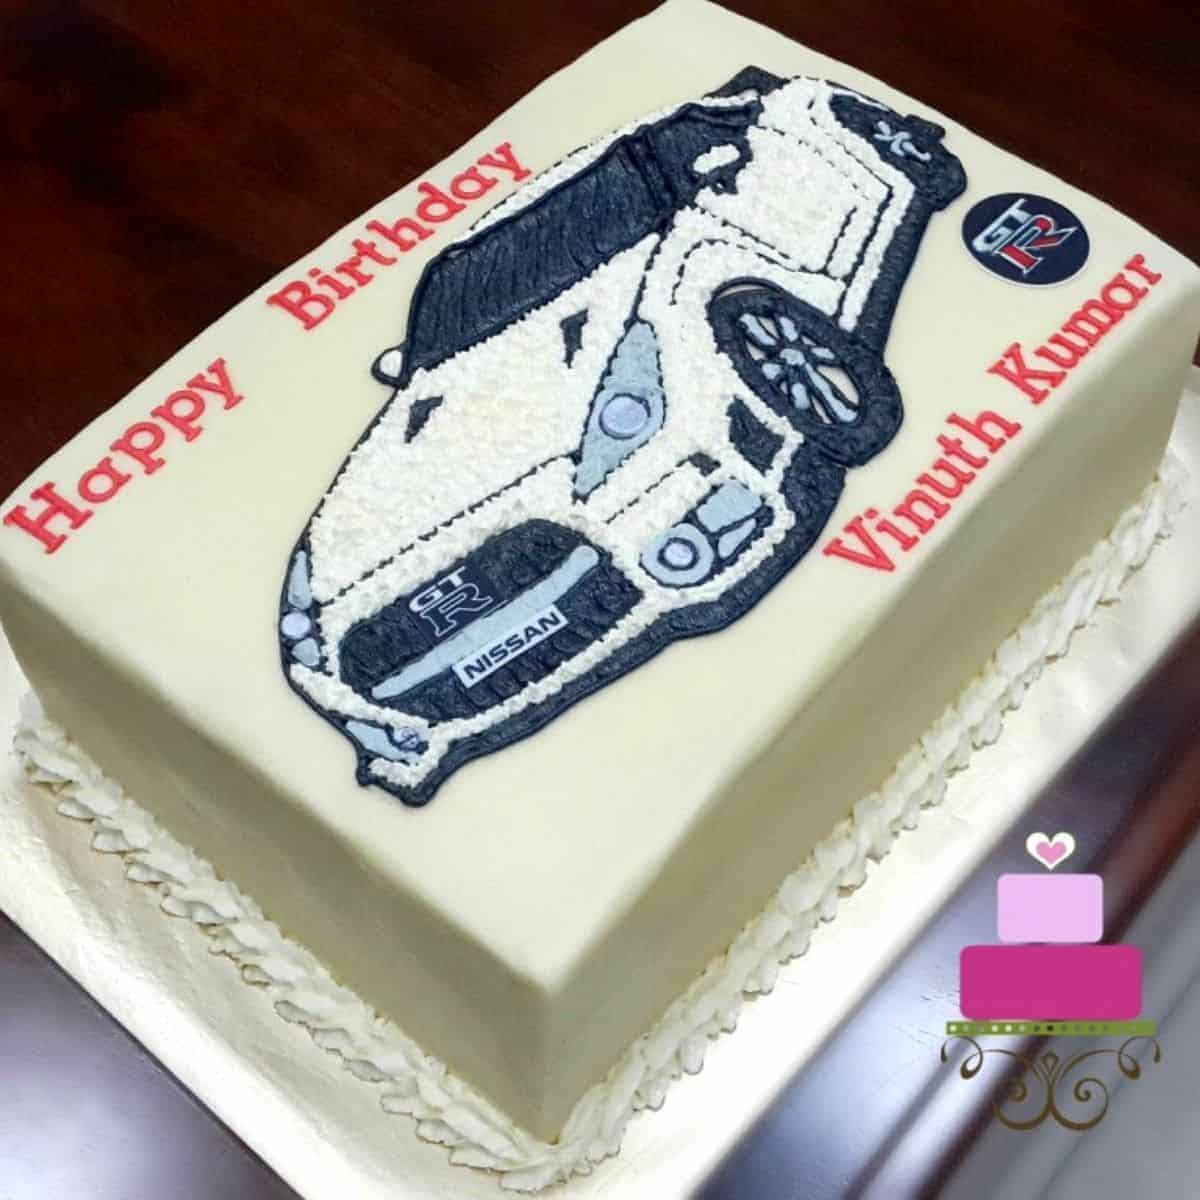 A rectangle cake decorated with Nissan GTR car image in buttercream